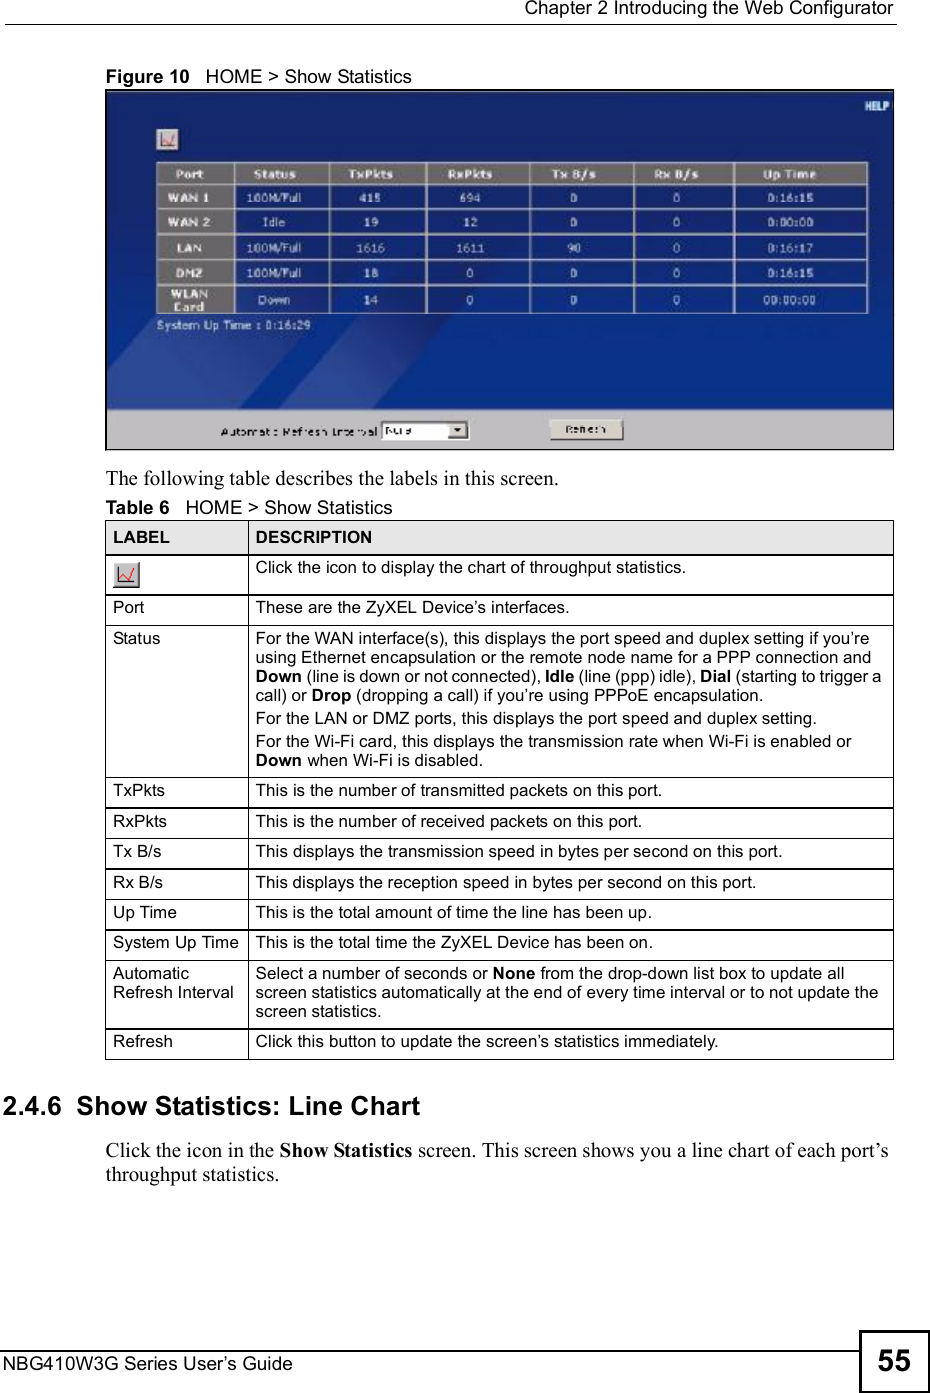  Chapter 2Introducing the Web ConfiguratorNBG410W3G Series User s Guide 55Figure 10   HOME &gt; Show StatisticsThe following table describes the labels in this screen.2.4.6  Show Statistics: Line ChartClick the icon in the Show Statistics screen. This screen shows you a line chart of each port!s throughput statistics.Table 6   HOME &gt; Show StatisticsLABEL  DESCRIPTIONClick the icon to display the chart of throughput statistics. PortThese are the ZyXEL Device s interfaces.  StatusFor the WAN interface(s), this displays the port speed and duplex setting if you re using Ethernet encapsulation or the remote node name for a PPP connection and Down (line is down or not connected), Idle (line (ppp) idle), Dial (starting to trigger a call) or Drop (dropping a call) if you re using PPPoE encapsulation. For the LAN or DMZ ports, this displays the port speed and duplex setting. For the Wi-Fi card, this displays the transmission rate when Wi-Fi is enabled or Down when Wi-Fi is disabled.TxPktsThis is the number of transmitted packets on this port.RxPktsThis is the number of received packets on this port.Tx B/sThis displays the transmission speed in bytes per second on this port.Rx B/sThis displays the reception speed in bytes per second on this port.Up TimeThis is the total amount of time the line has been up.System Up TimeThis is the total time the ZyXEL Device has been on.Automatic Refresh Interval Select a number of seconds or None from the drop-down list box to update all screen statistics automatically at the end of every time interval or to not update the screen statistics.RefreshClick this button to update the screen s statistics immediately.